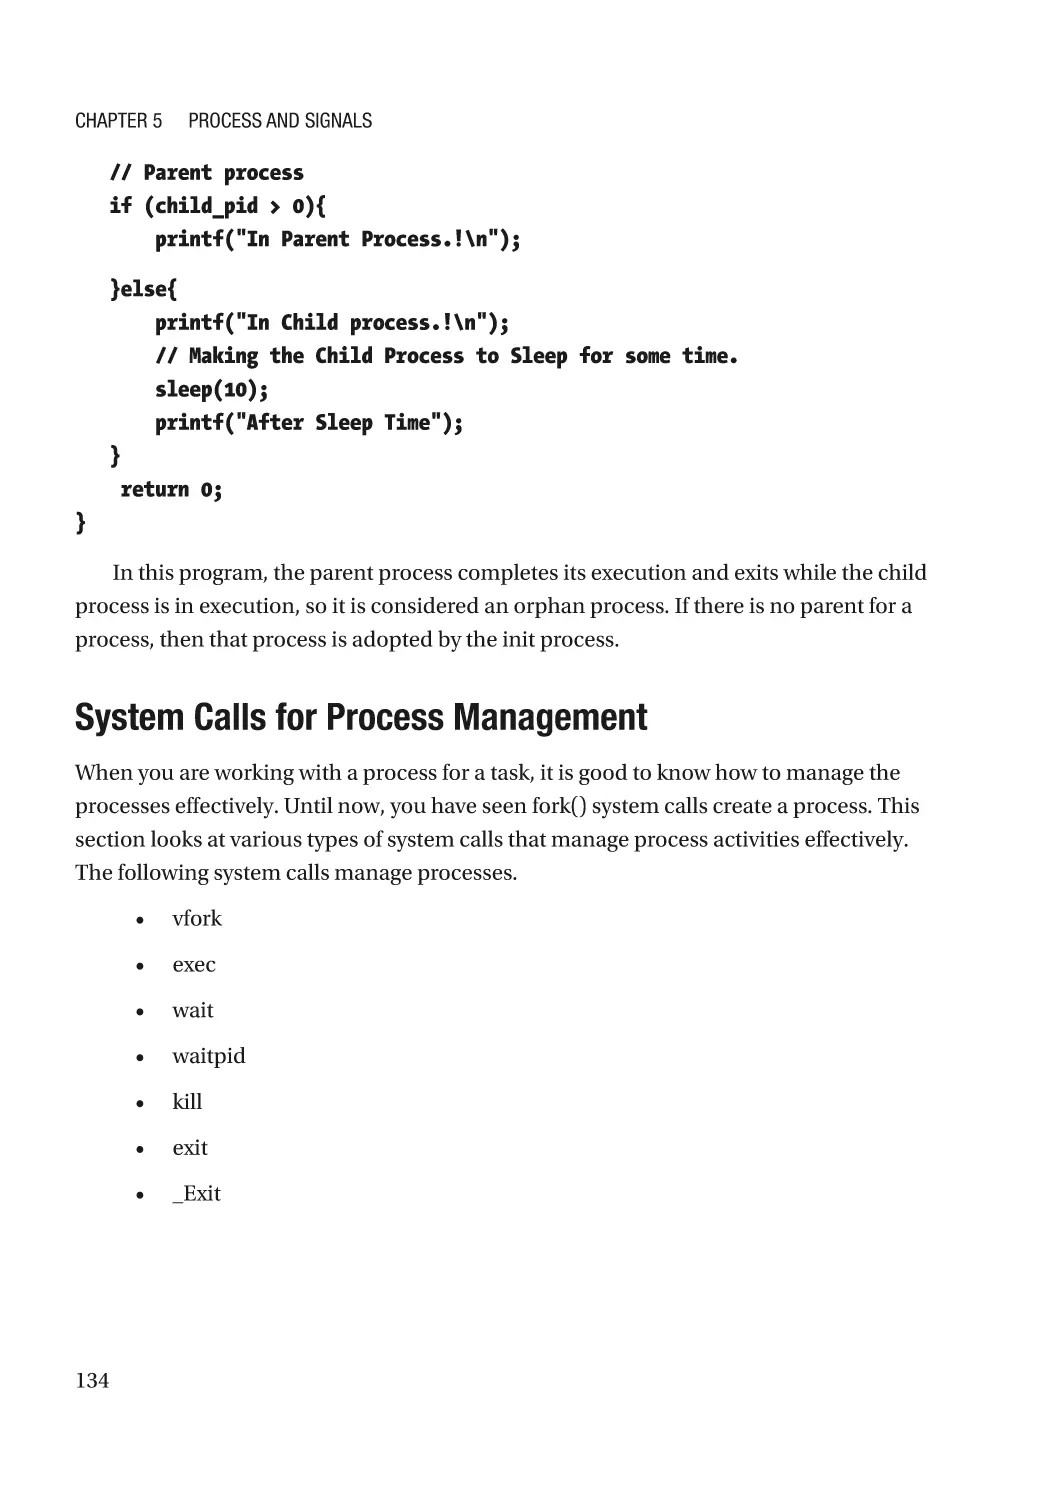 System Calls for Process Management